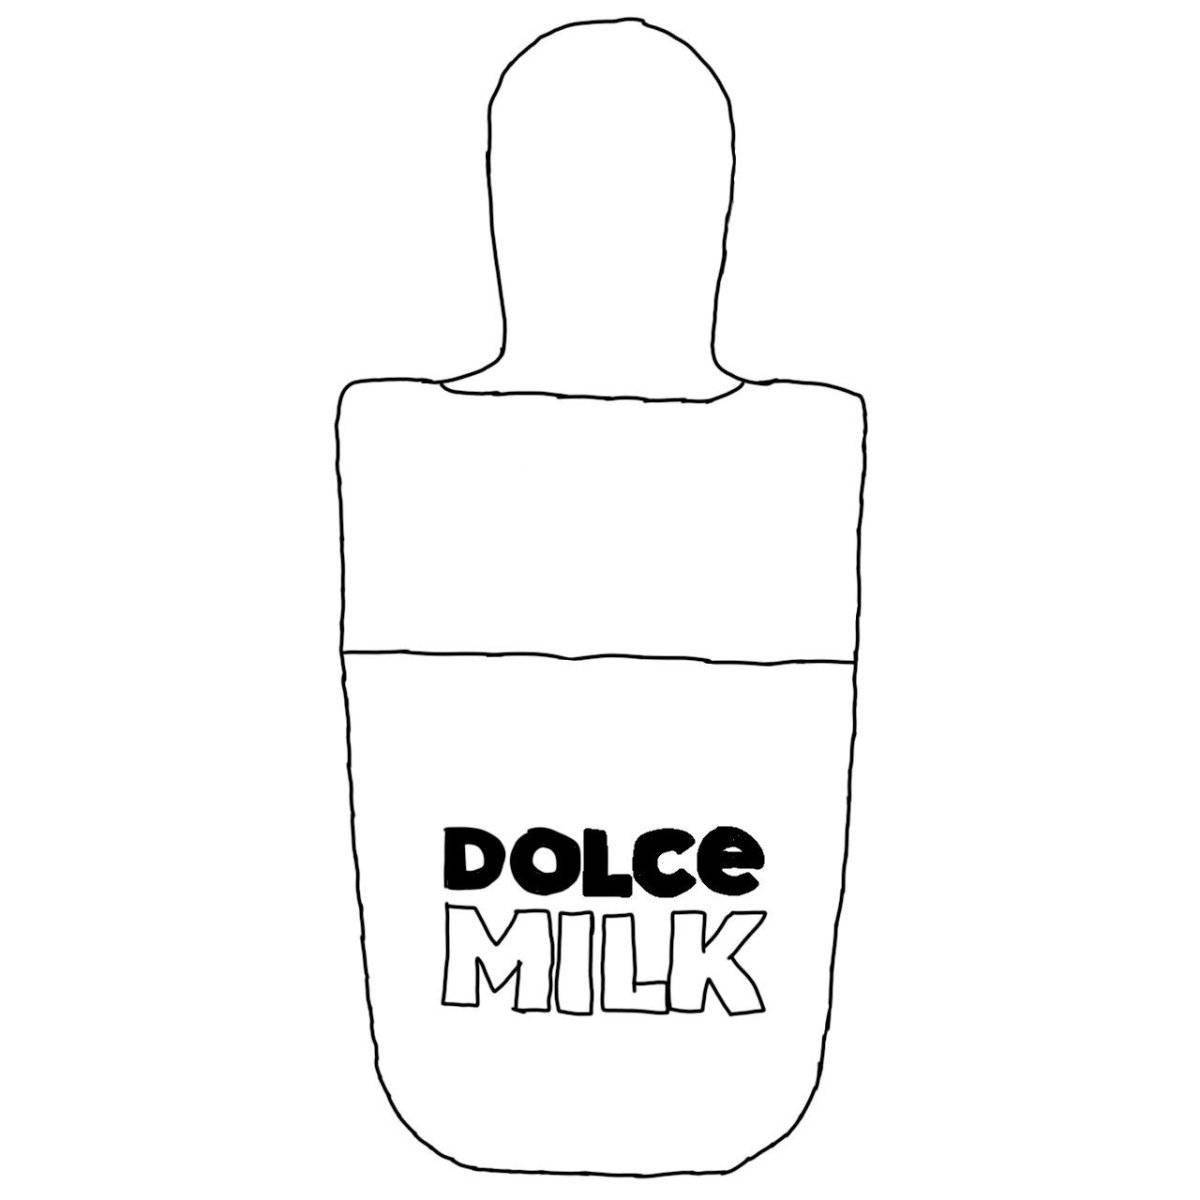 Amazing coloring pages cosmetics for girls dolce milk